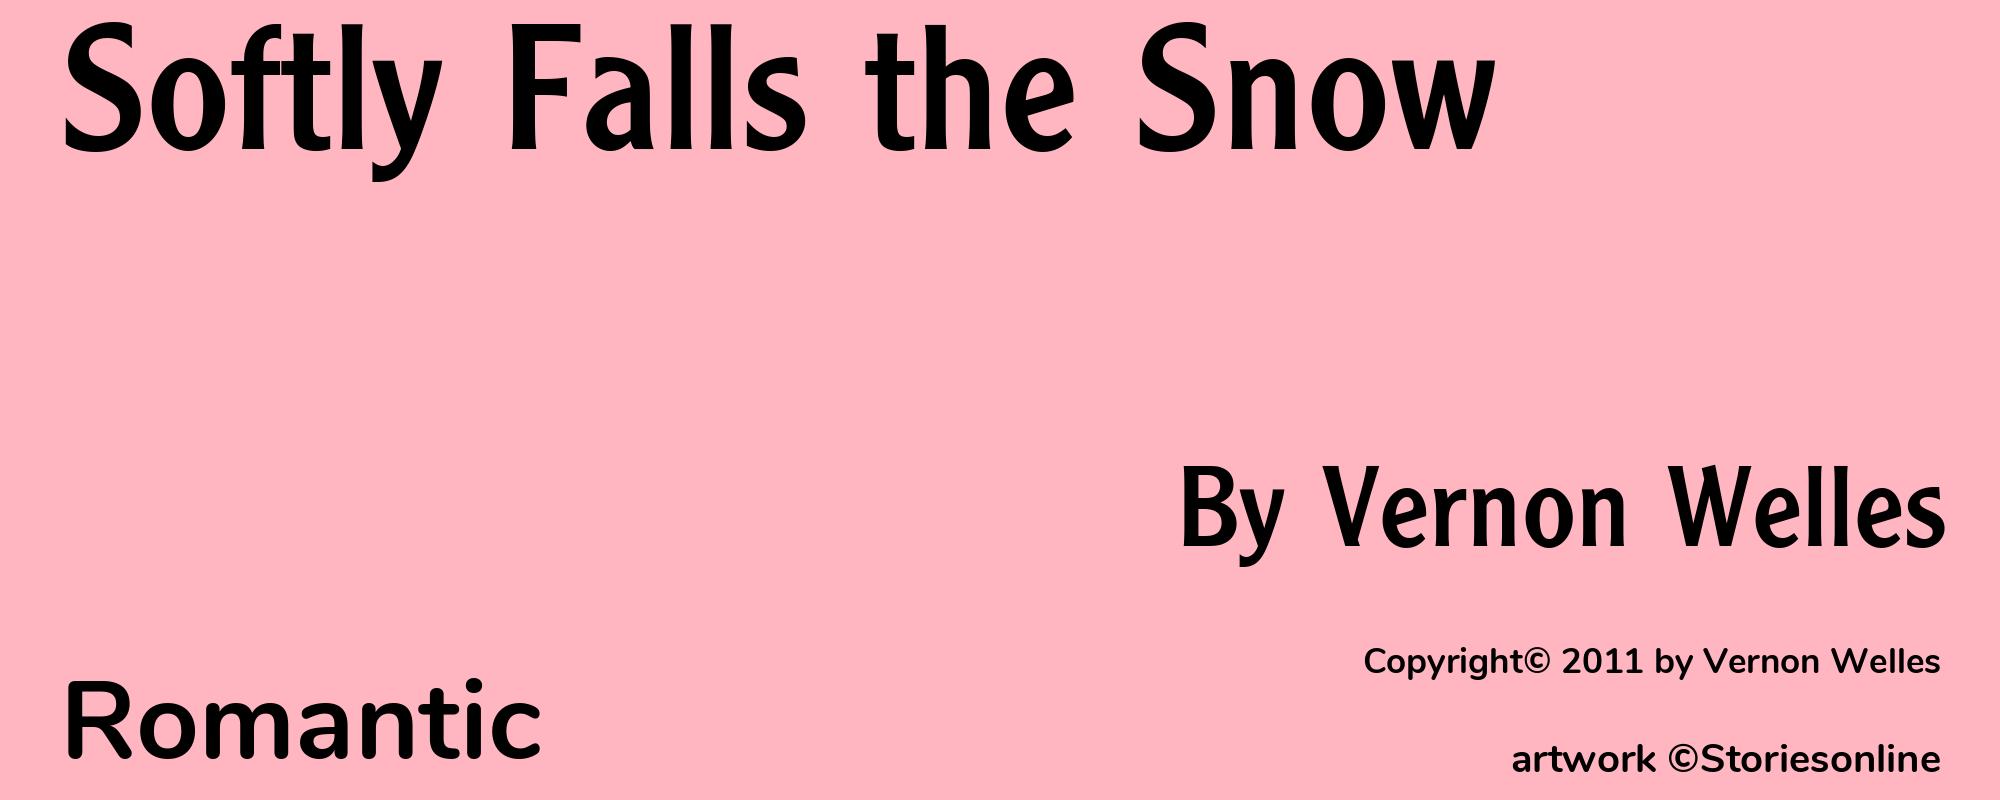 Softly Falls the Snow - Cover